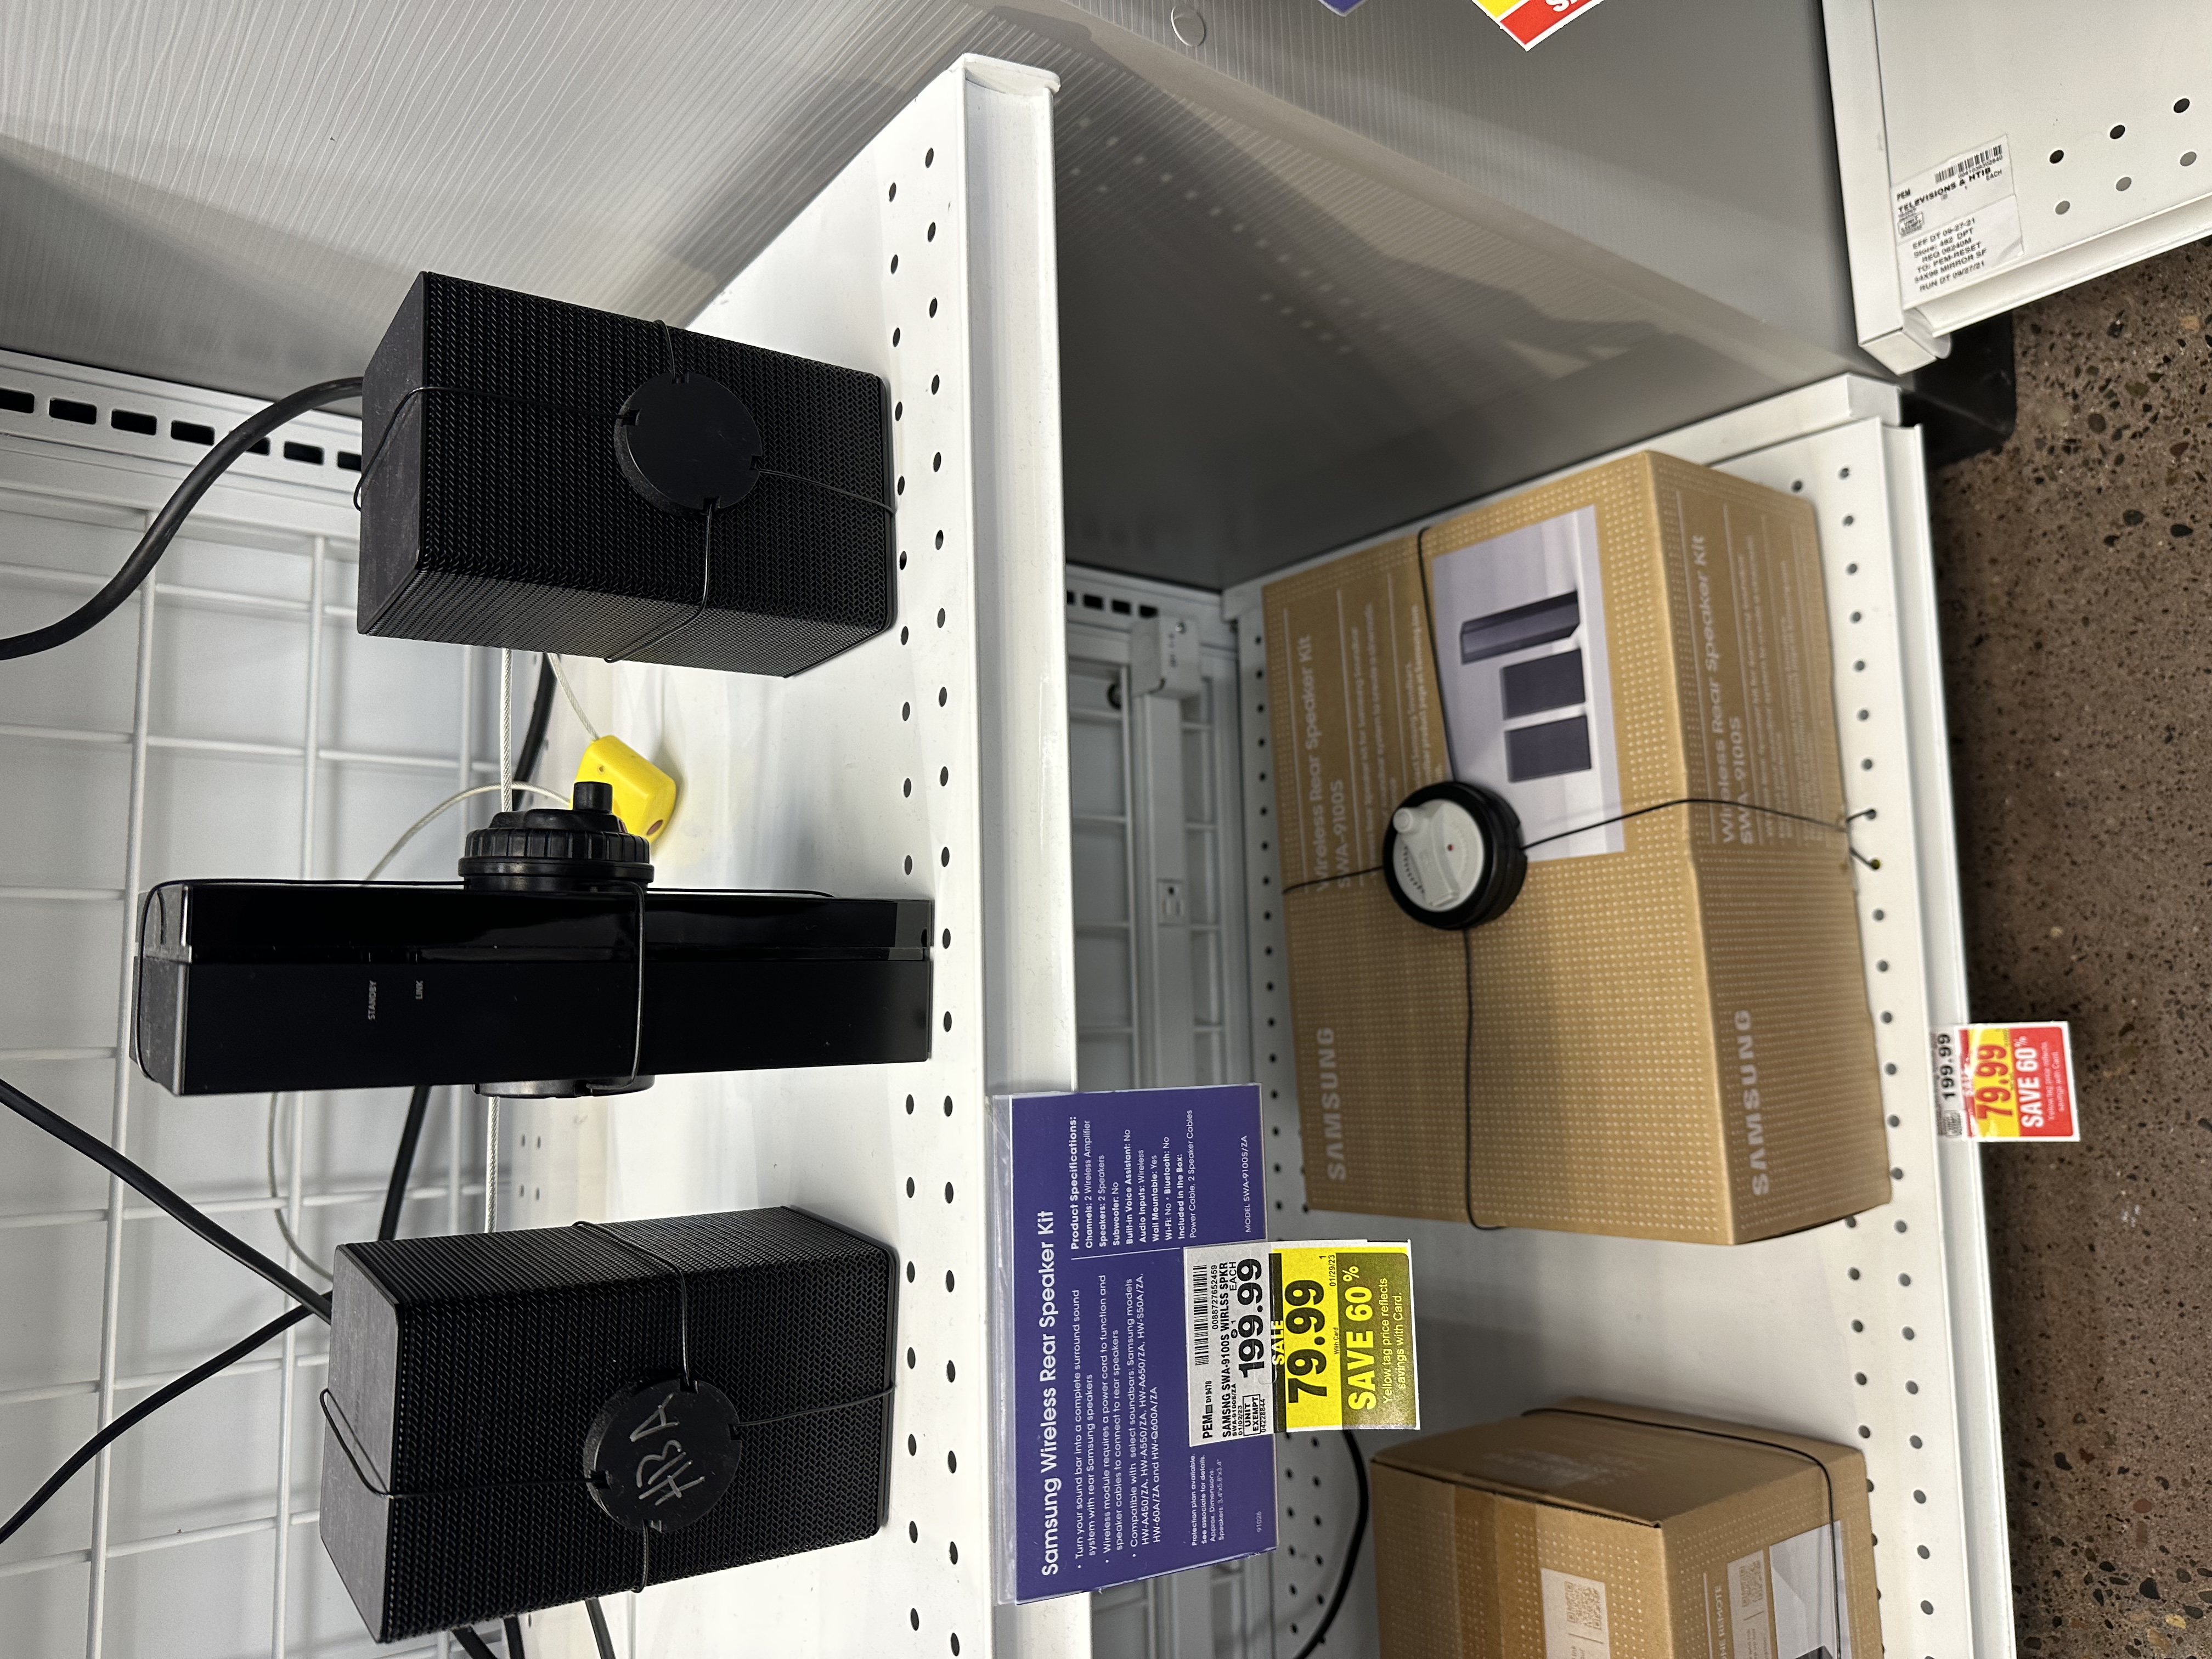 YMMV - In Store Clearance - Samsung SWA-9100S surround speaker kit - at Fred Meyer $79.99